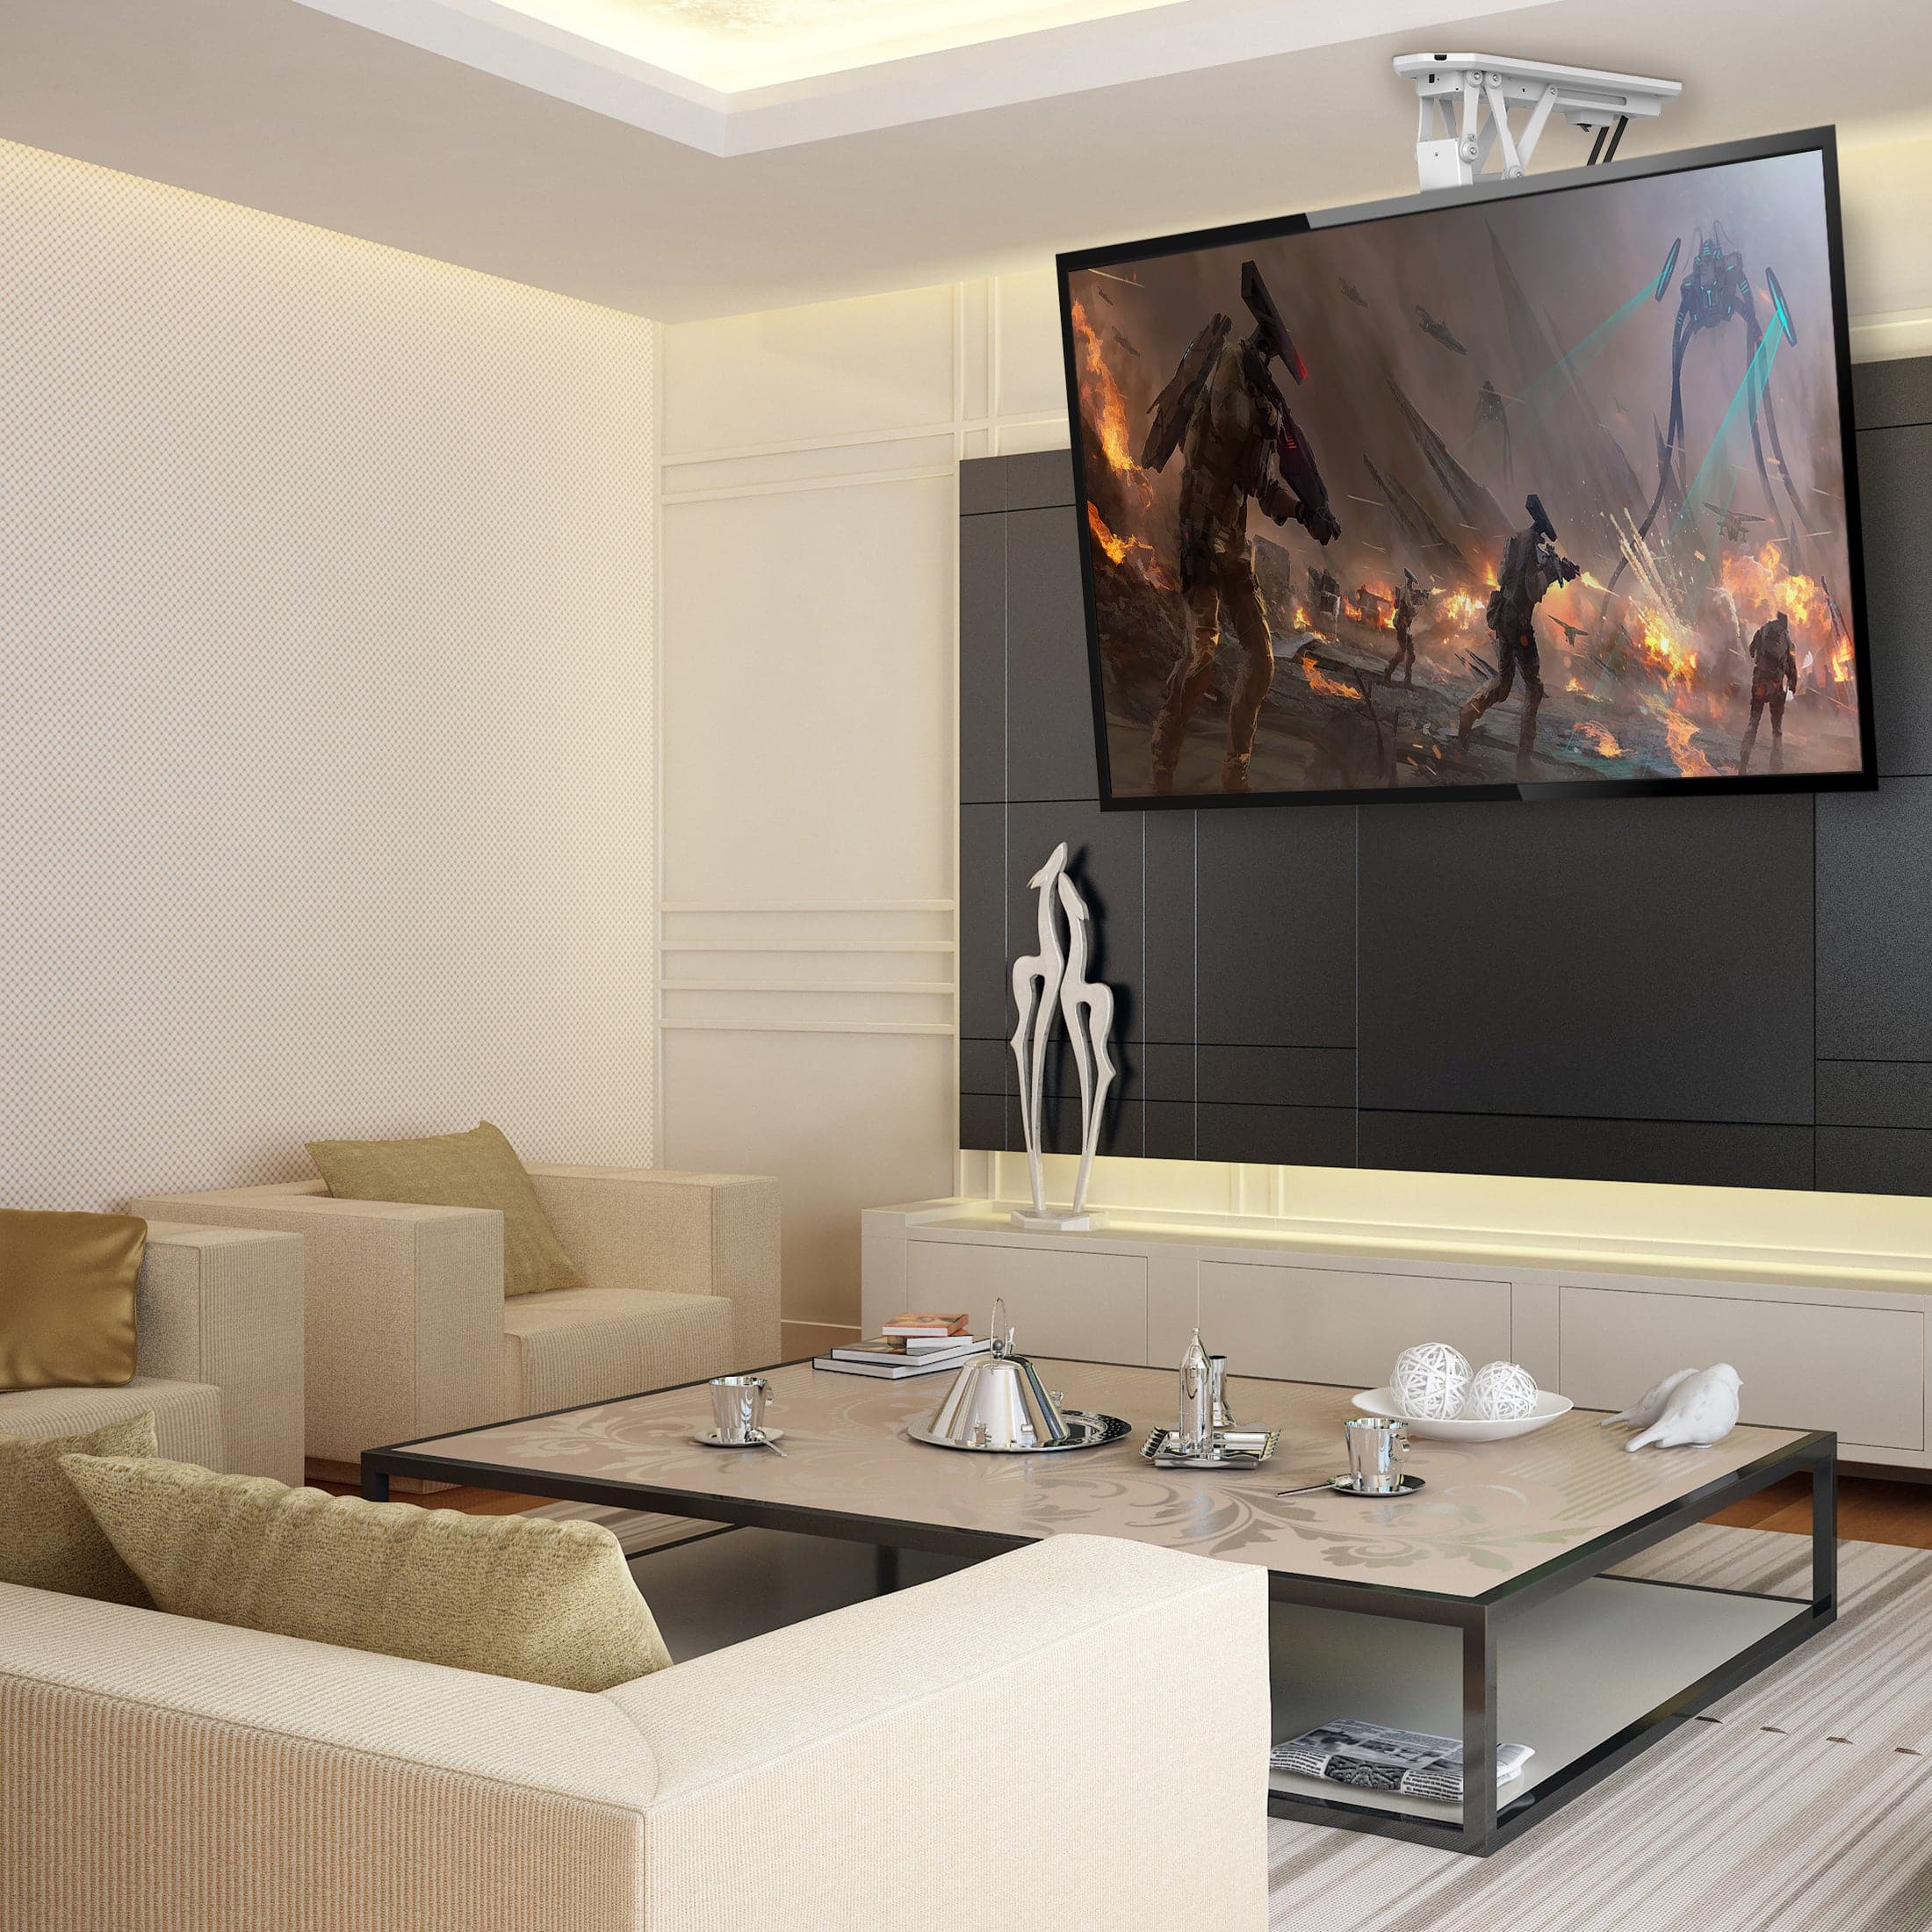 Motorized Ceiling TV Mount with Remote and App Controller